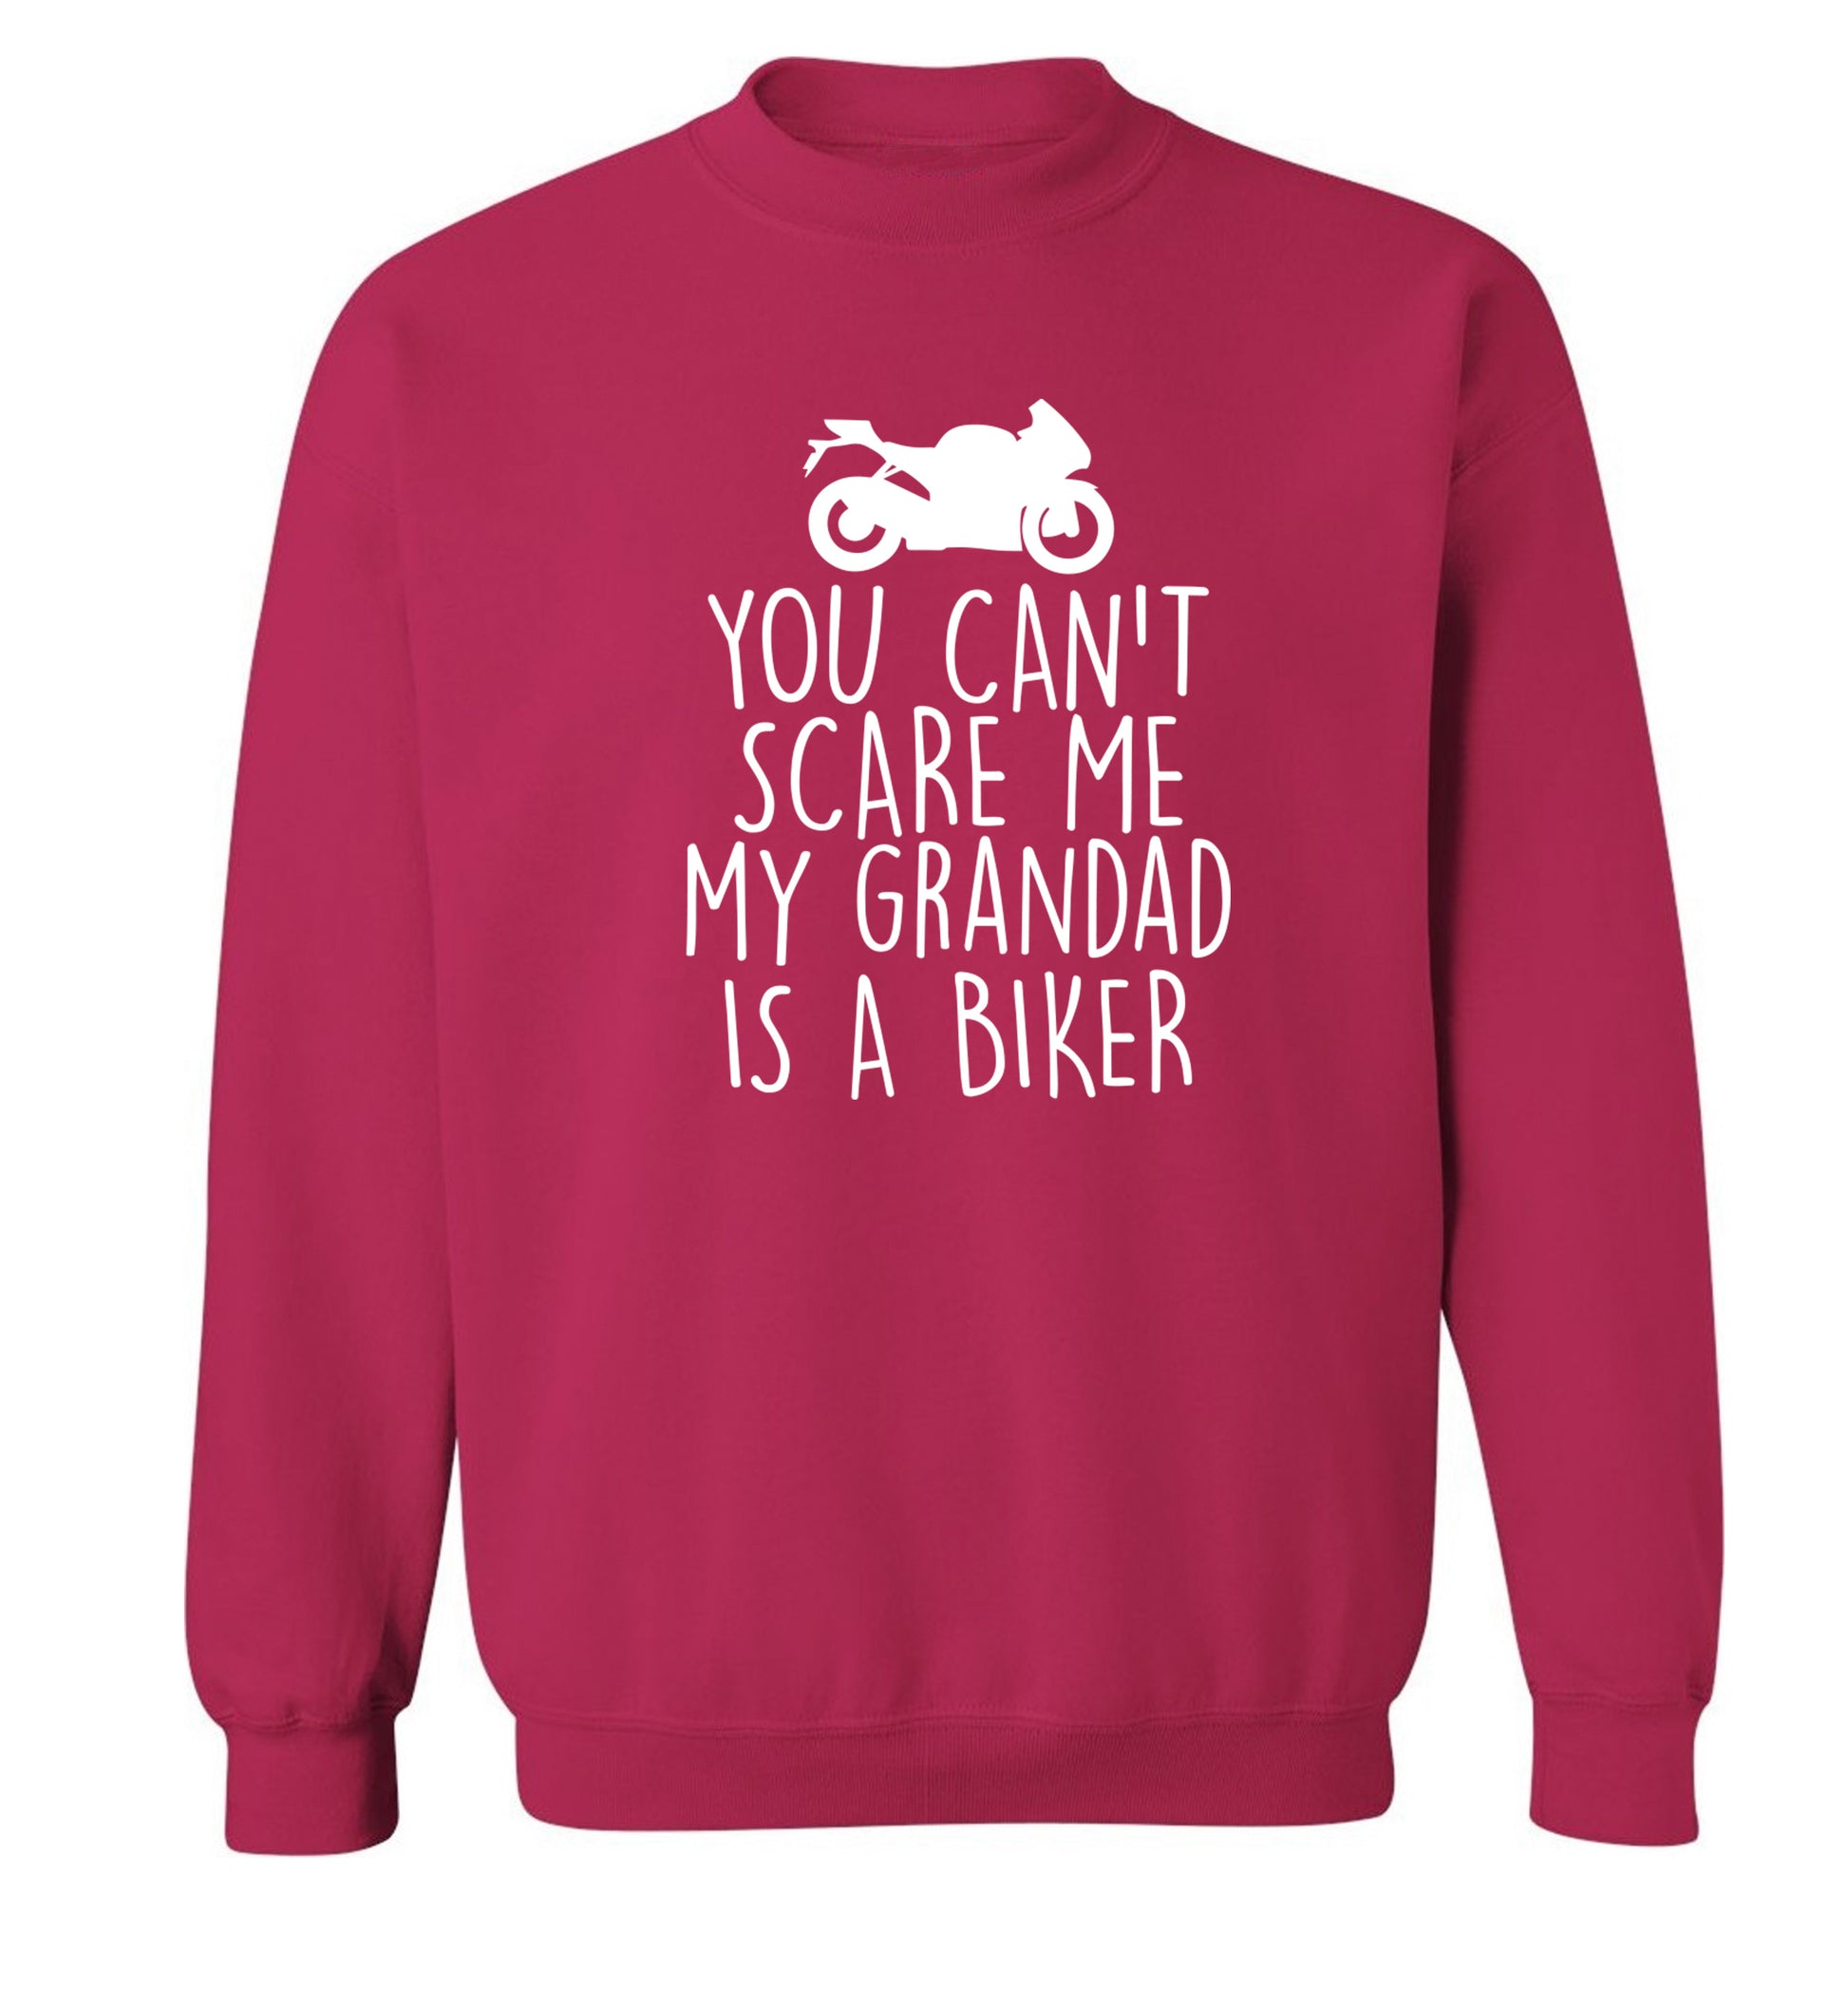 You can't scare me my grandad is a biker Adult's unisex pink Sweater 2XL